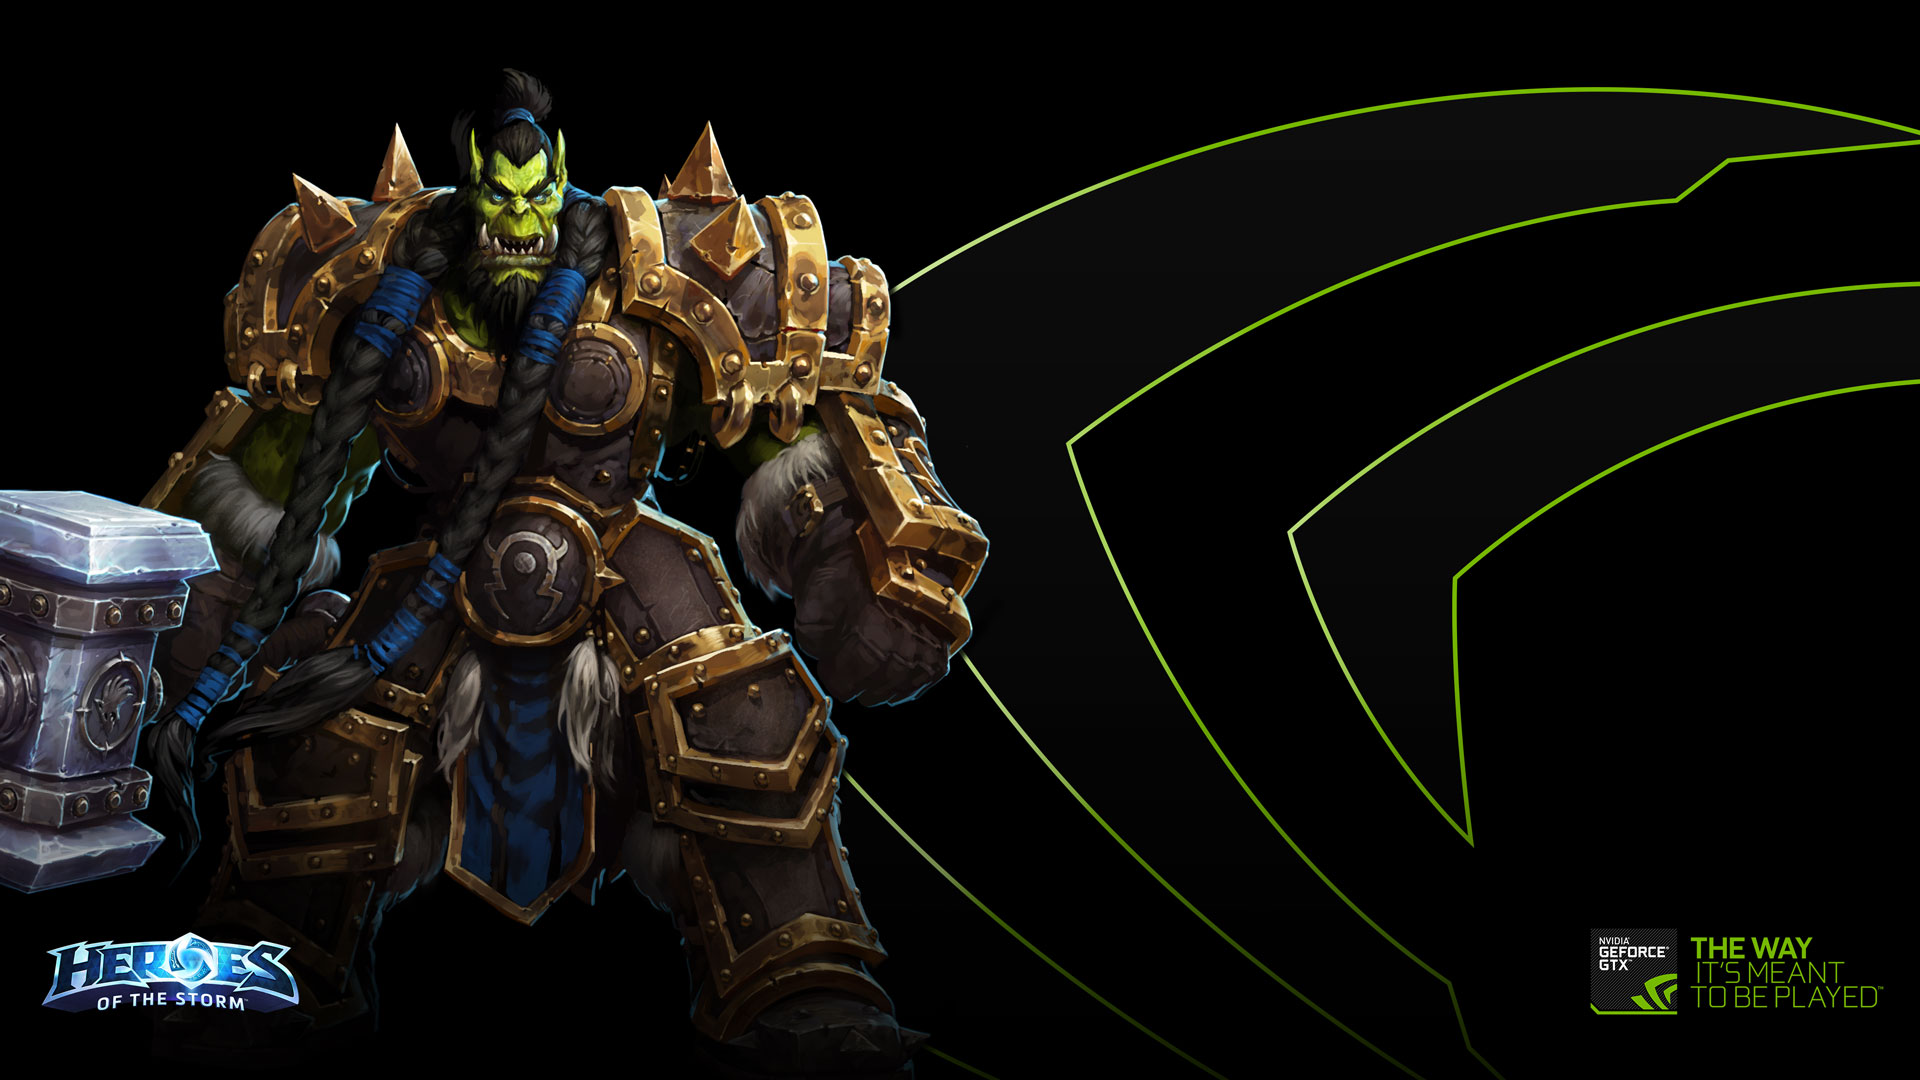 These Heroes Of The Storm Wallpaper Geforce